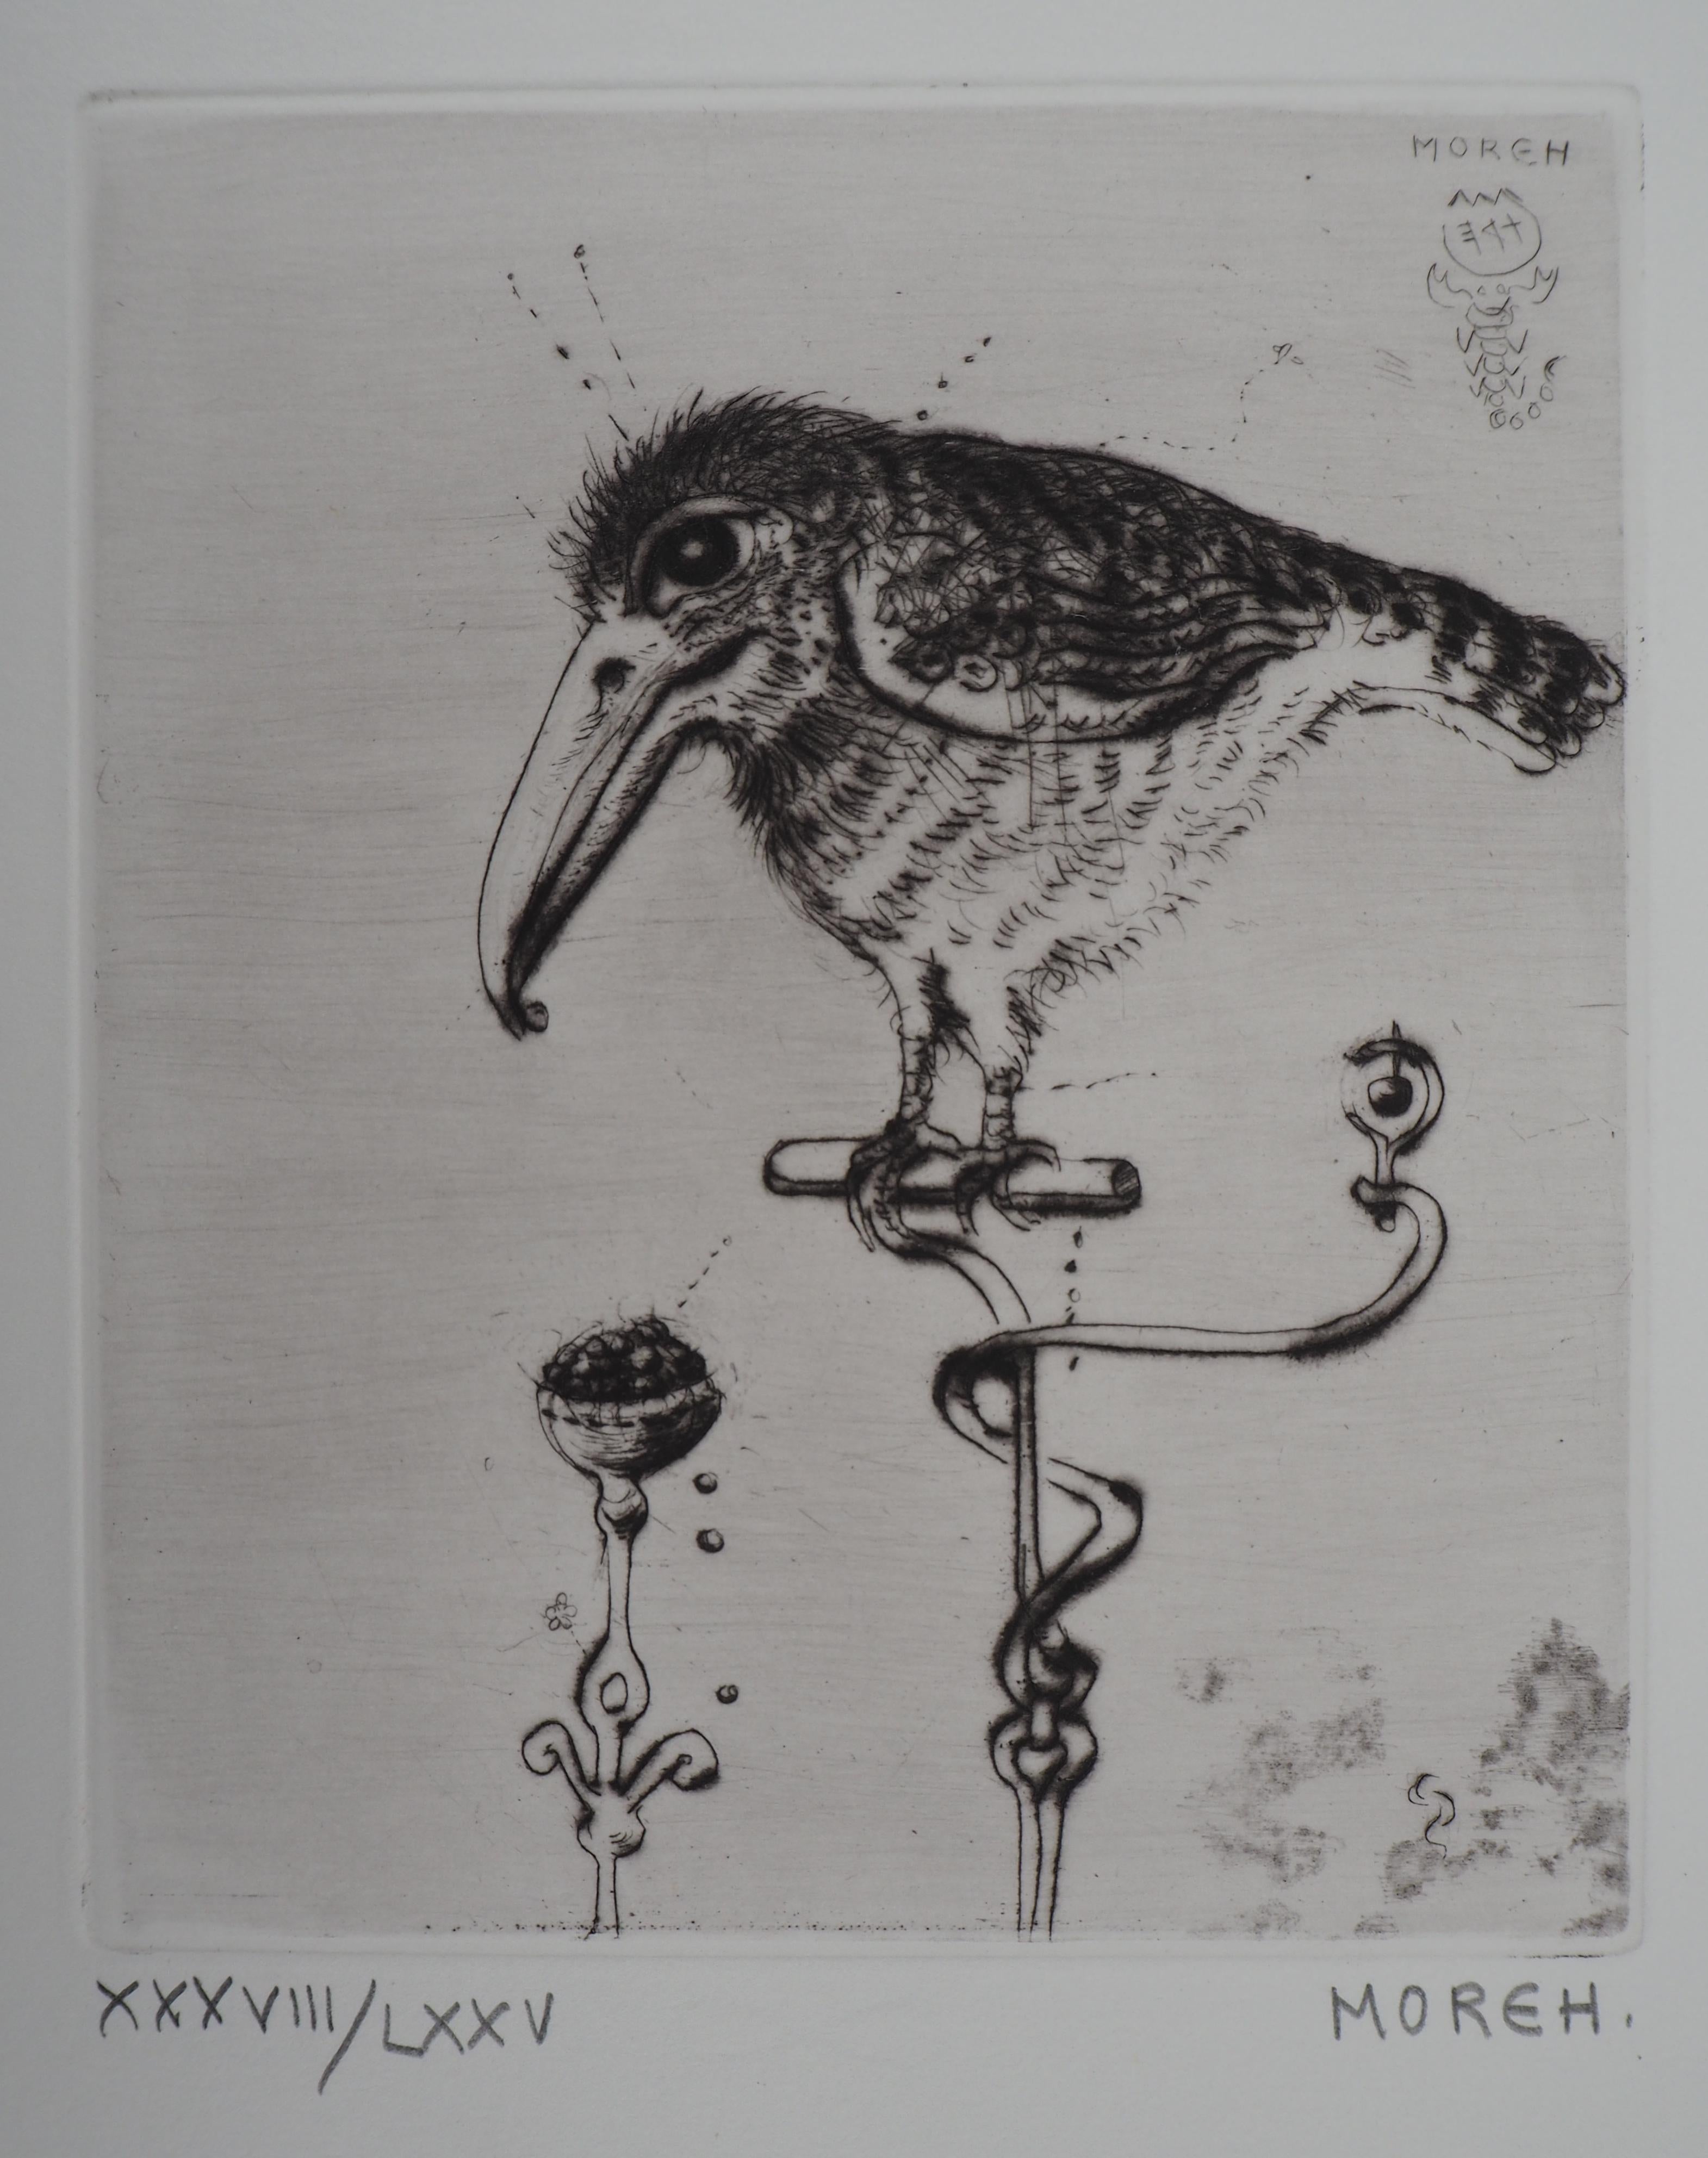 The Little Bird - Original Etching Handsigned, Ltd 75 copies - Print by Mordecai Moreh